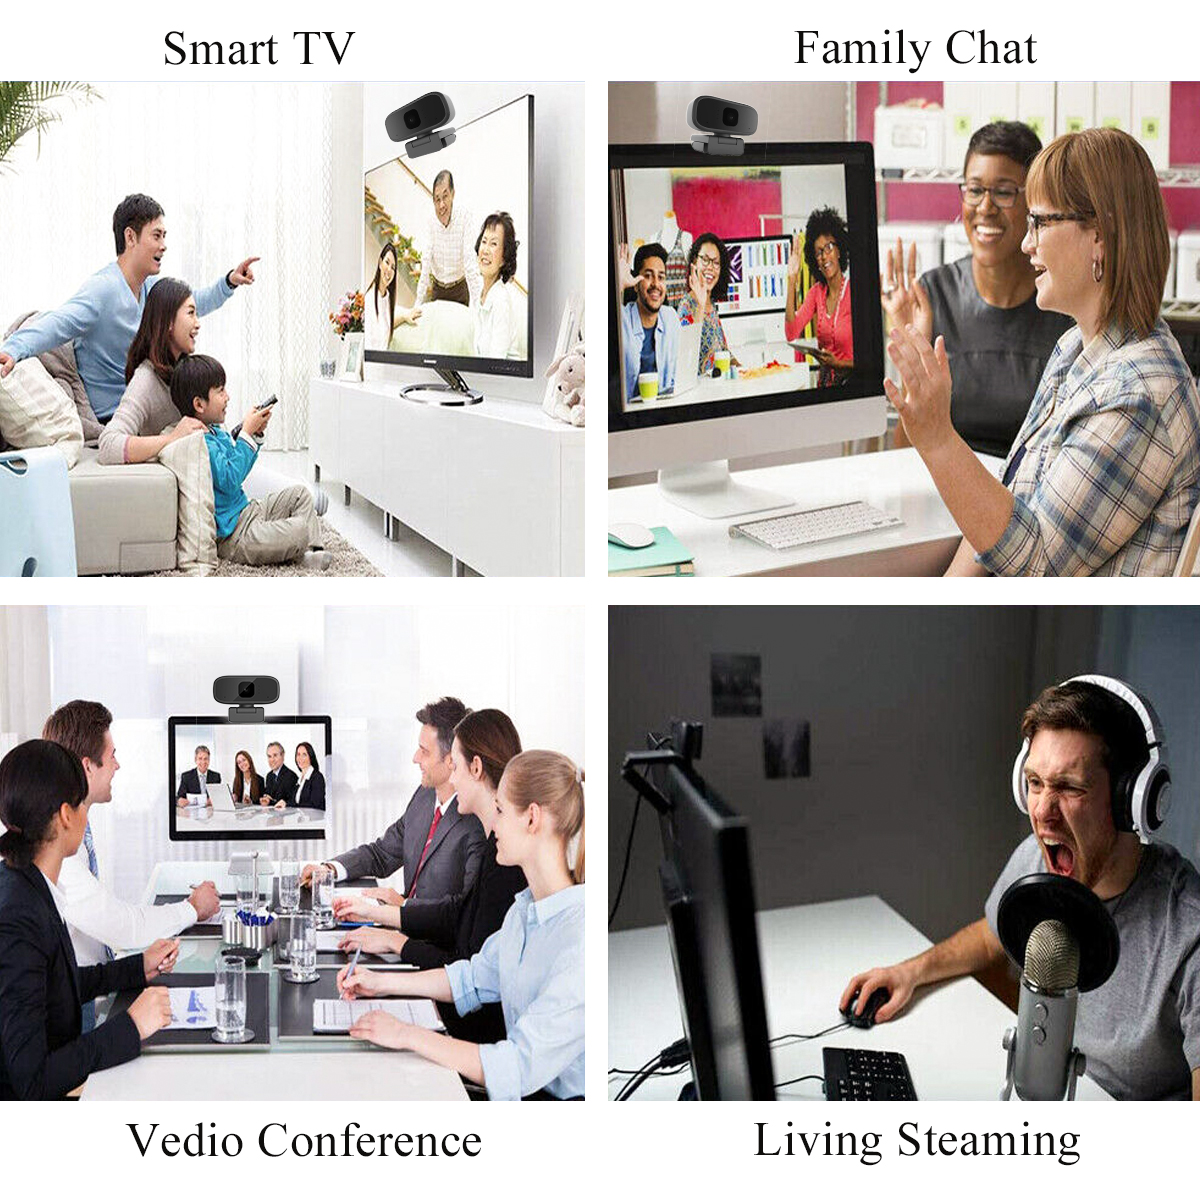 720P-USB-Webcam-Conference-Live-Auto-focus-Computer-Camera-Built-in-Sound-Absorption-Micphone-for-PC-1675452-8